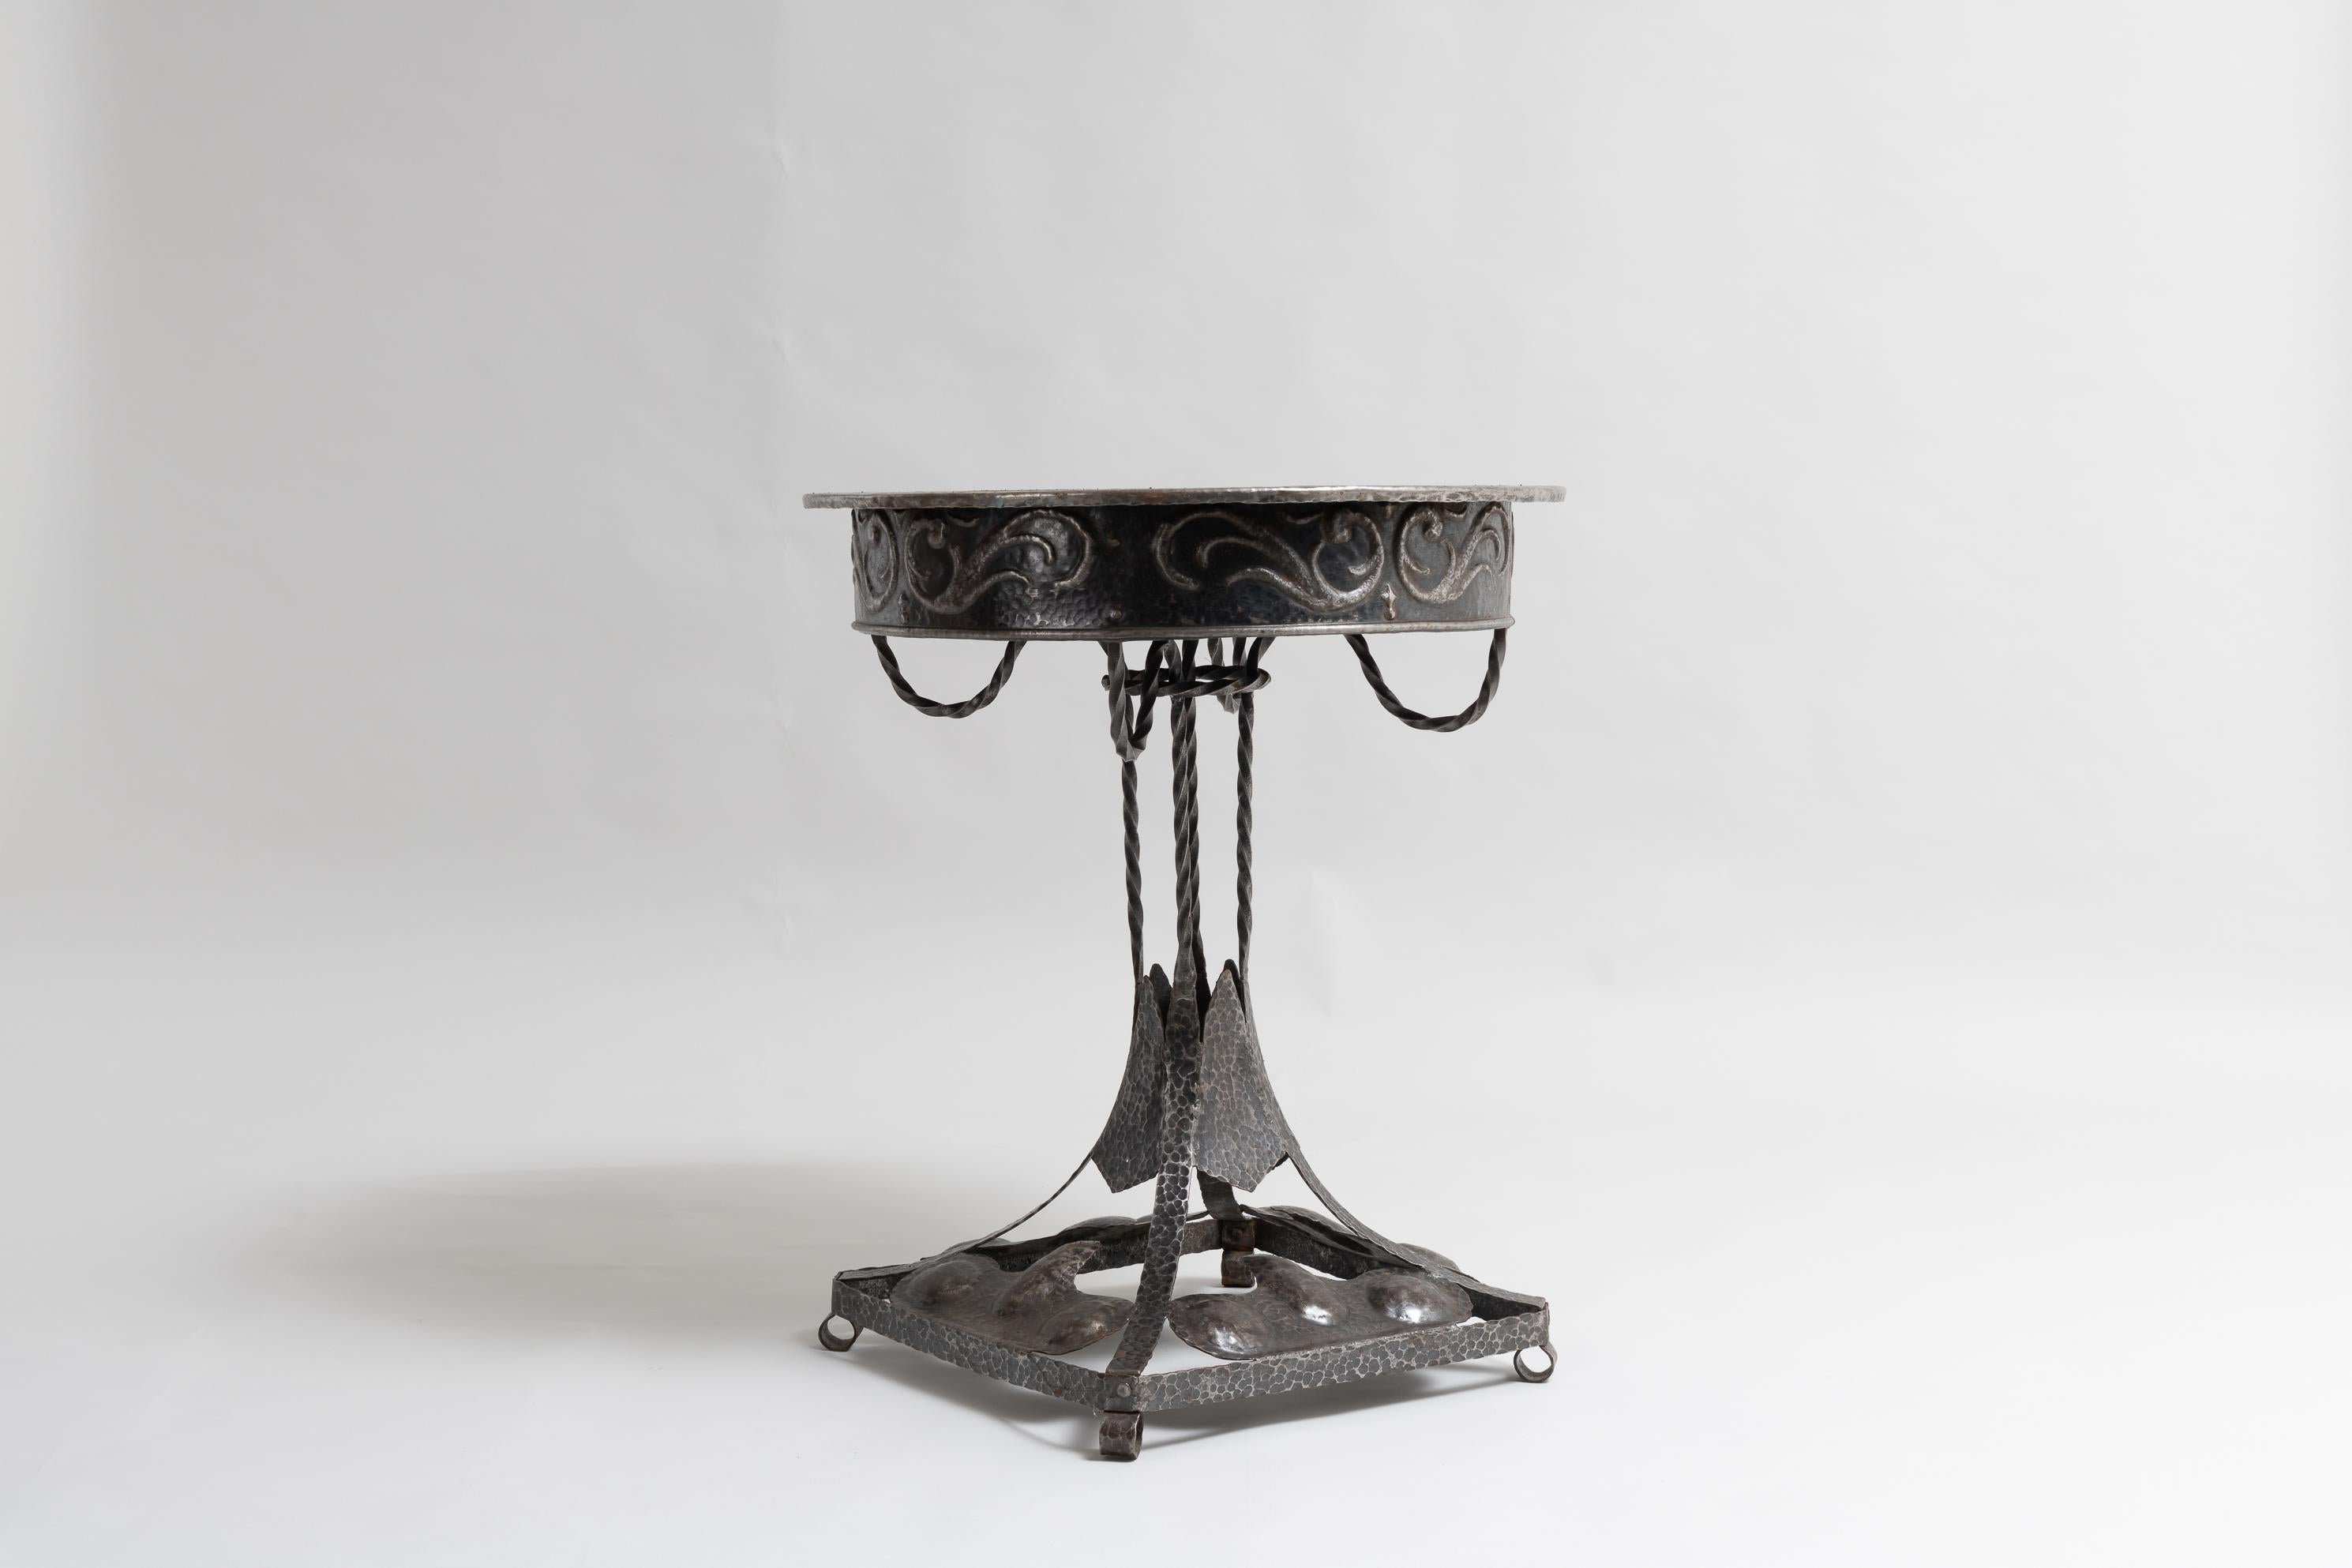 Hand-Crafted 20th Century Swedish Round Art Nouveau Iron Table